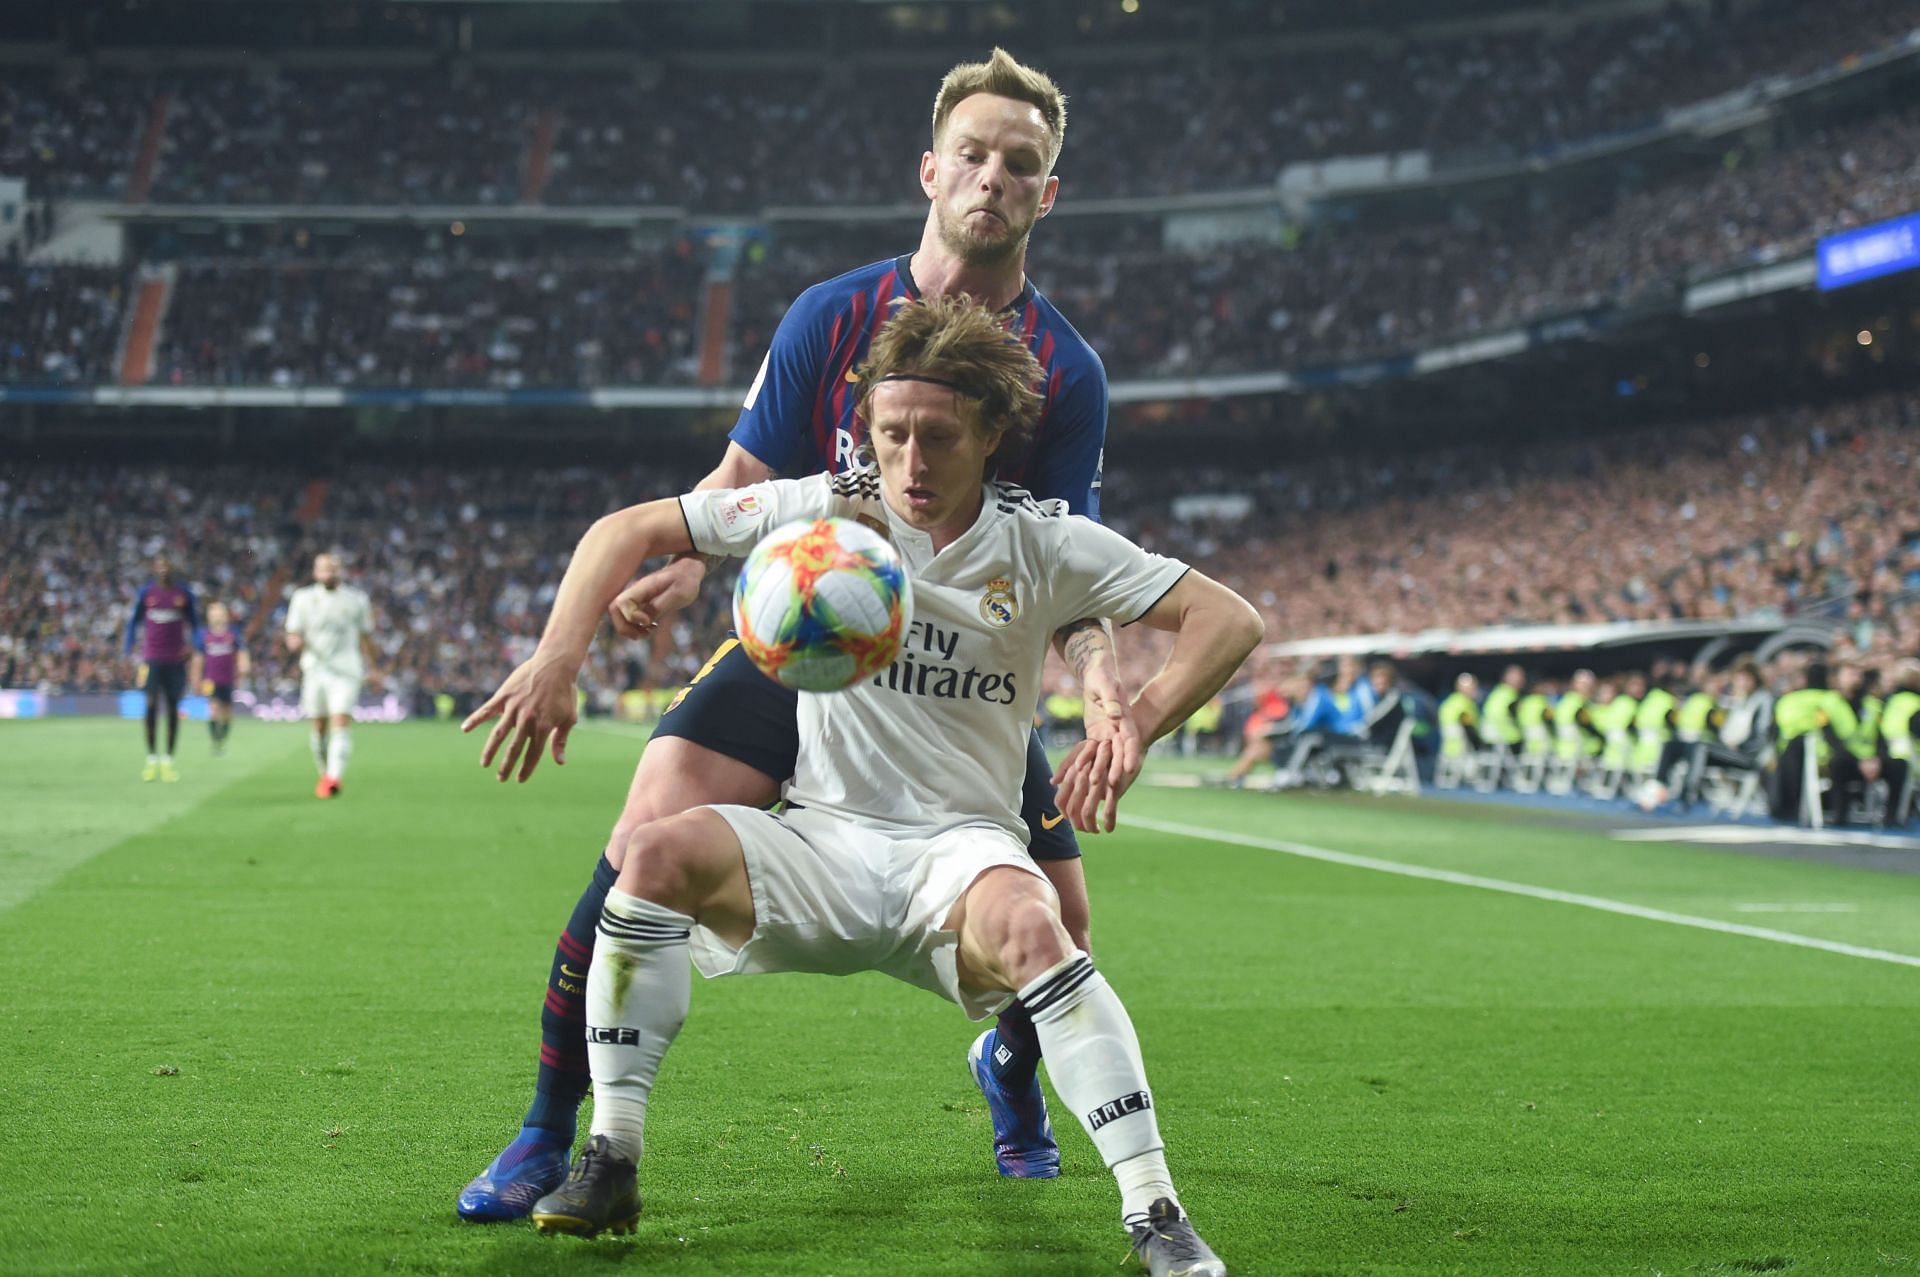 Modric (front) picked compatriot Rakitic (behind) in his dream five-a-side team.